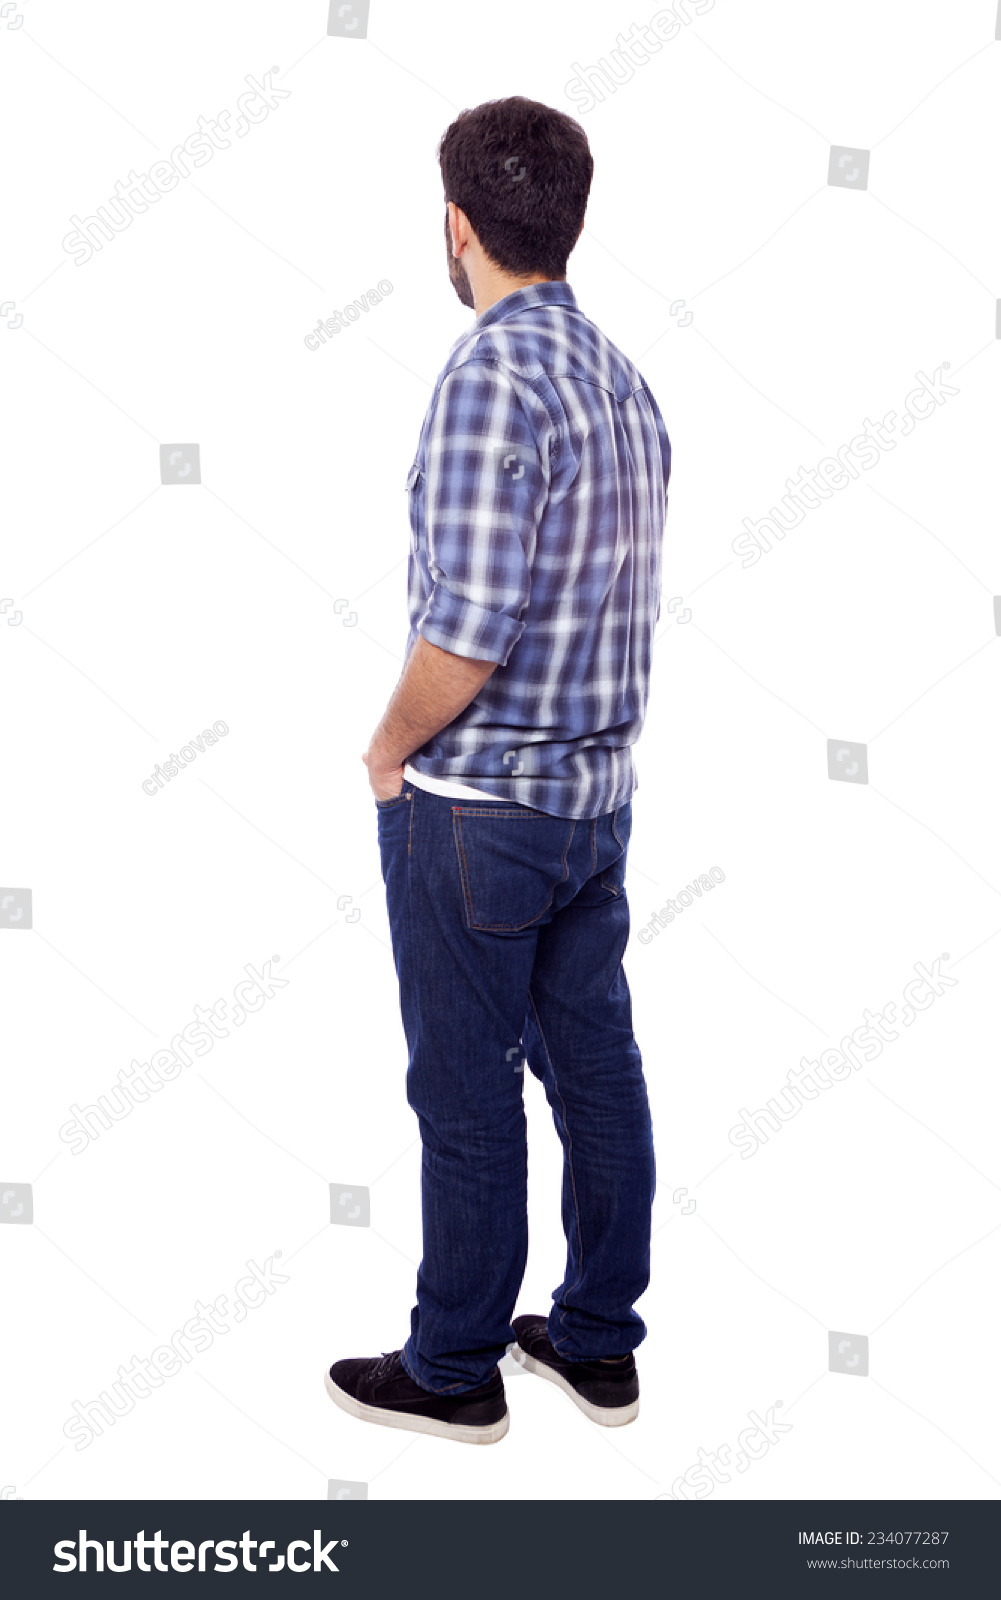 Back view of young casual man, isolated on white background #234077287